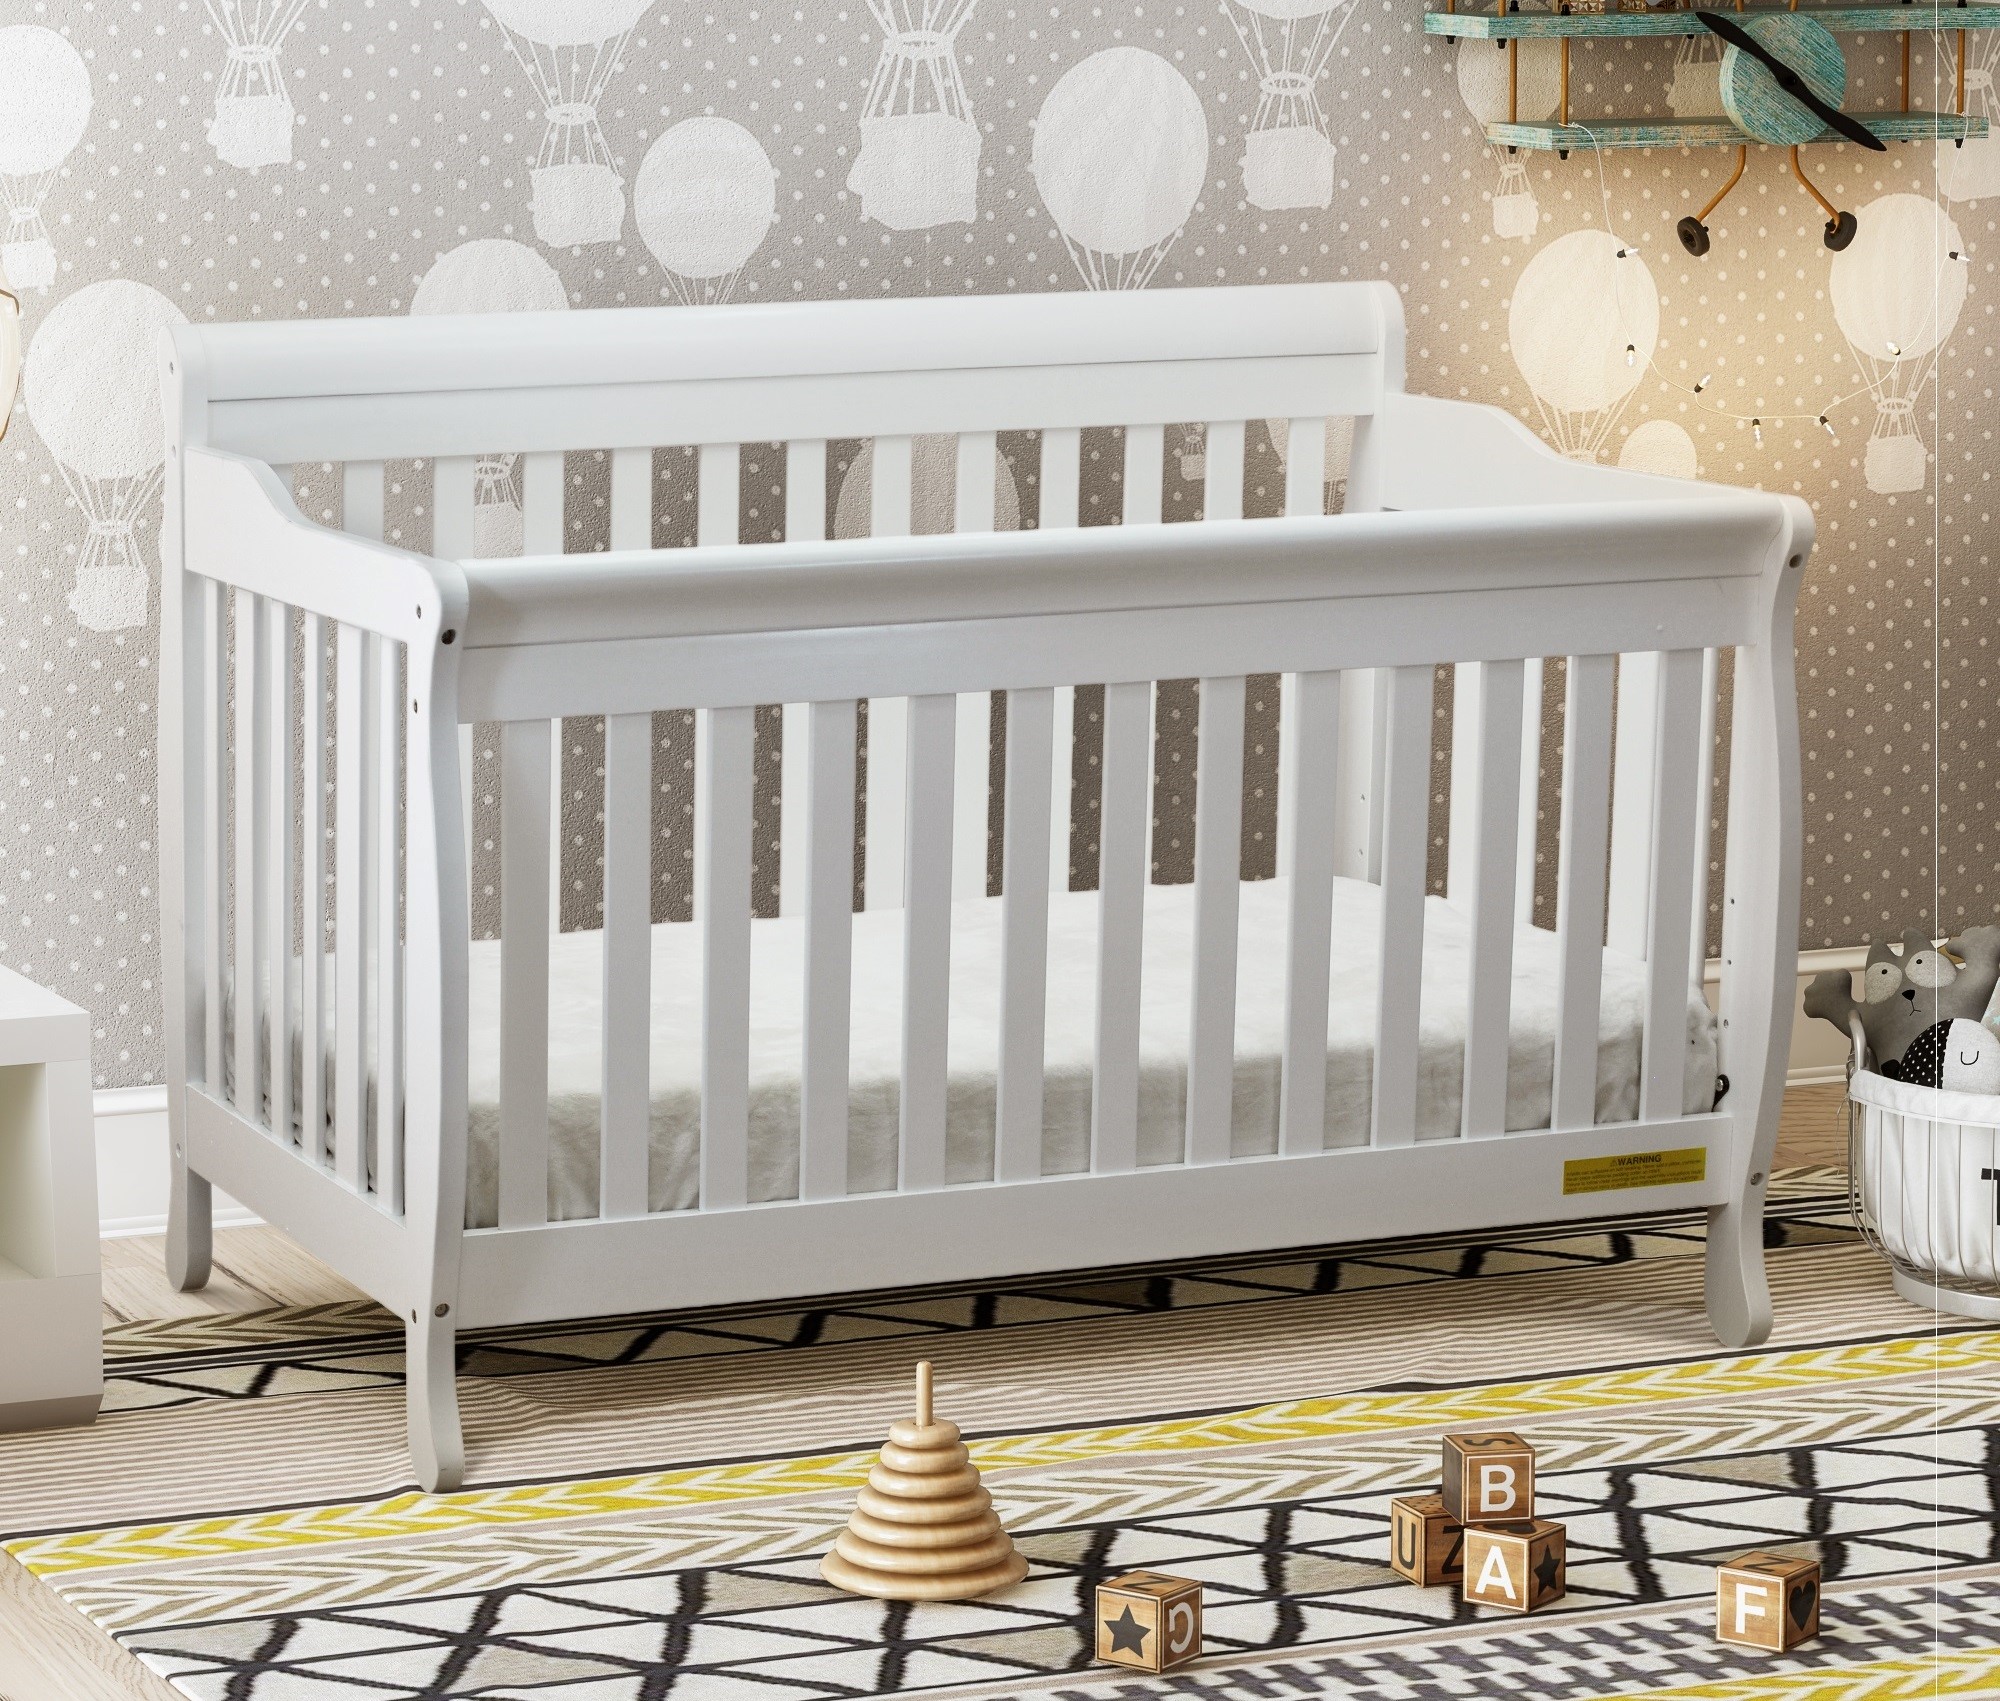 Afg 4689w Alice 4 In 1 Convertible Crib With Toddler Rail - White